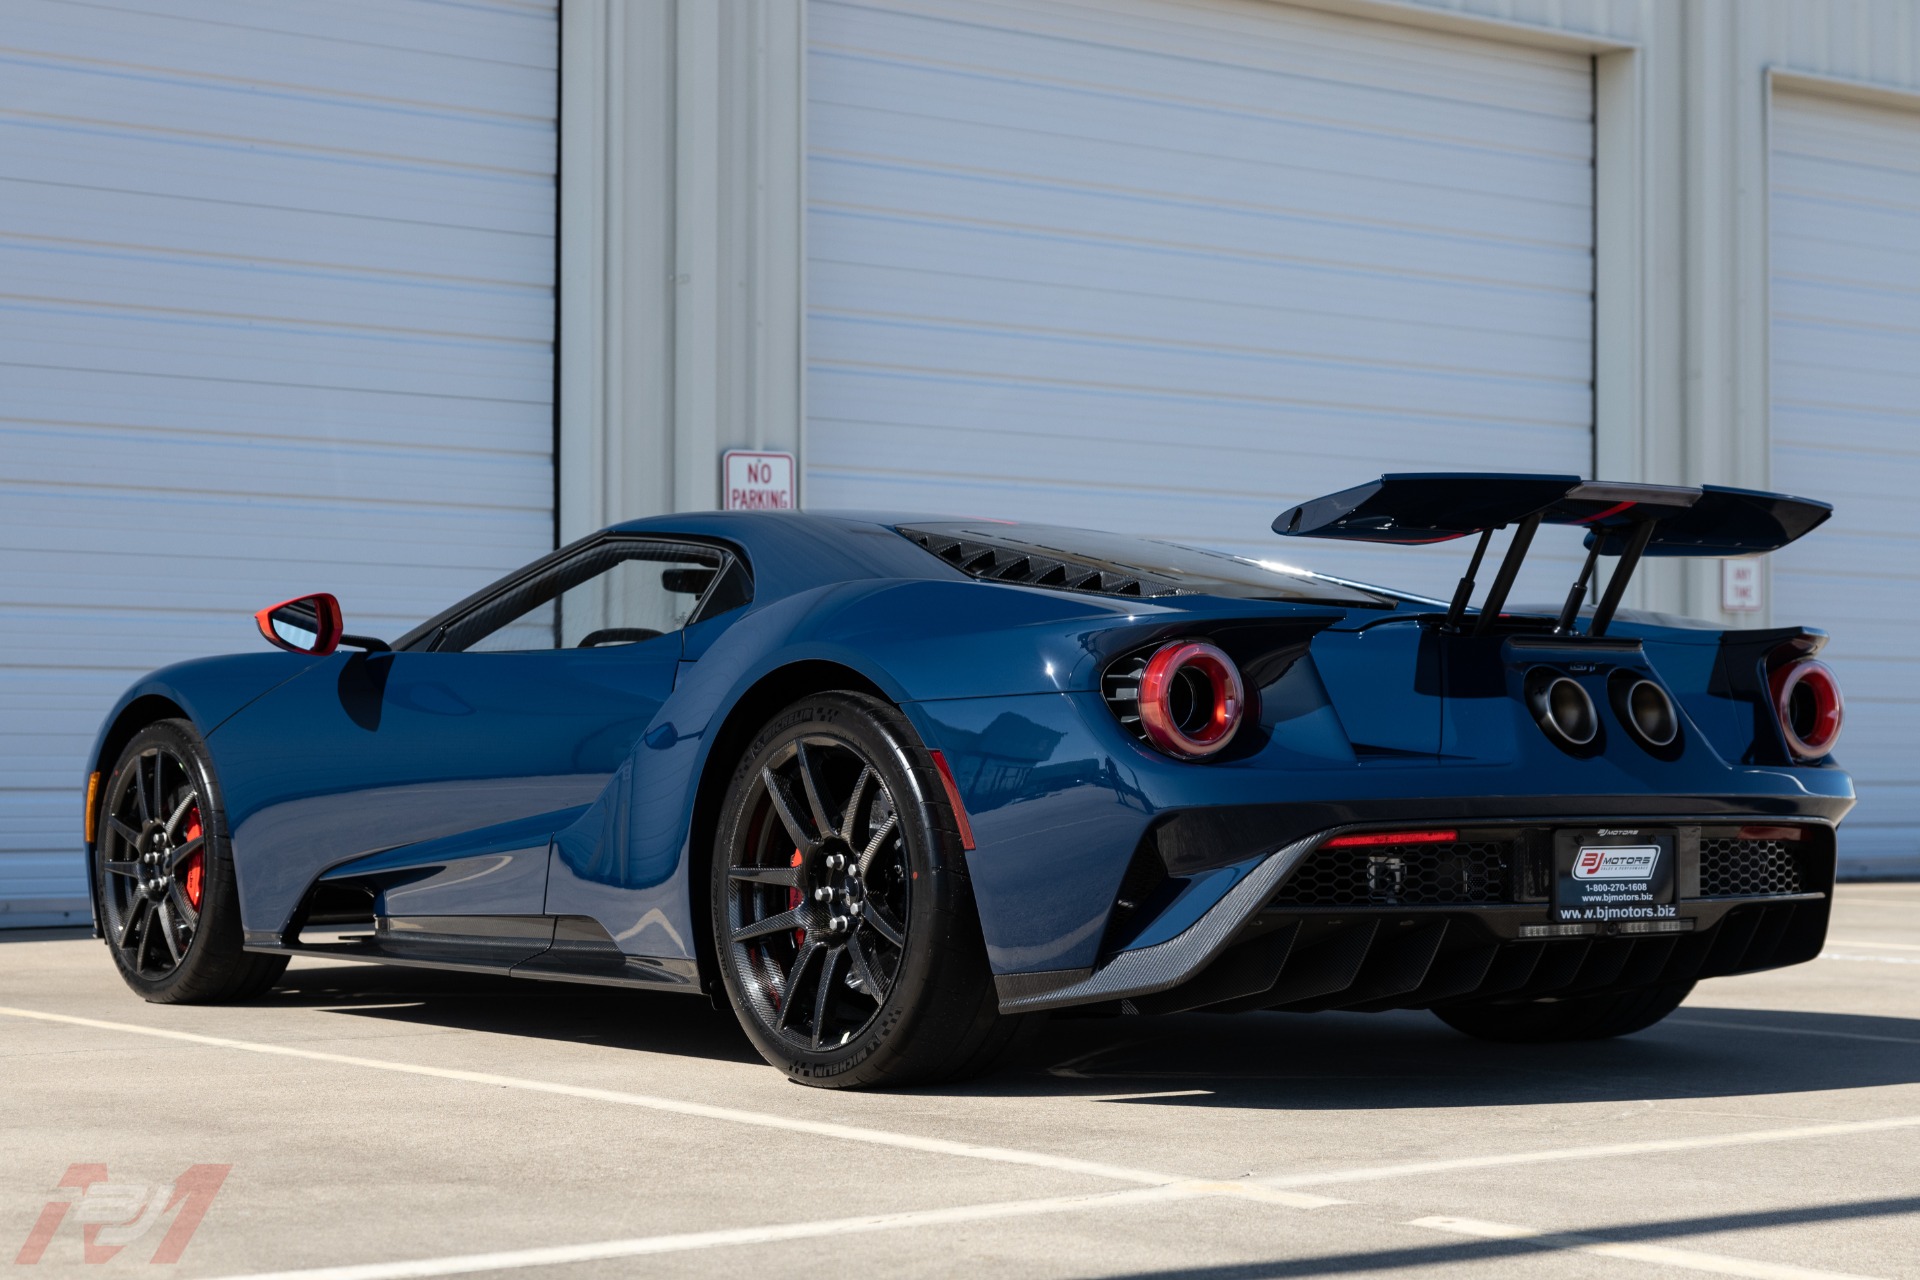 Used-2020-Ford-GT-Carbon-Series-with-Delivery-Miles